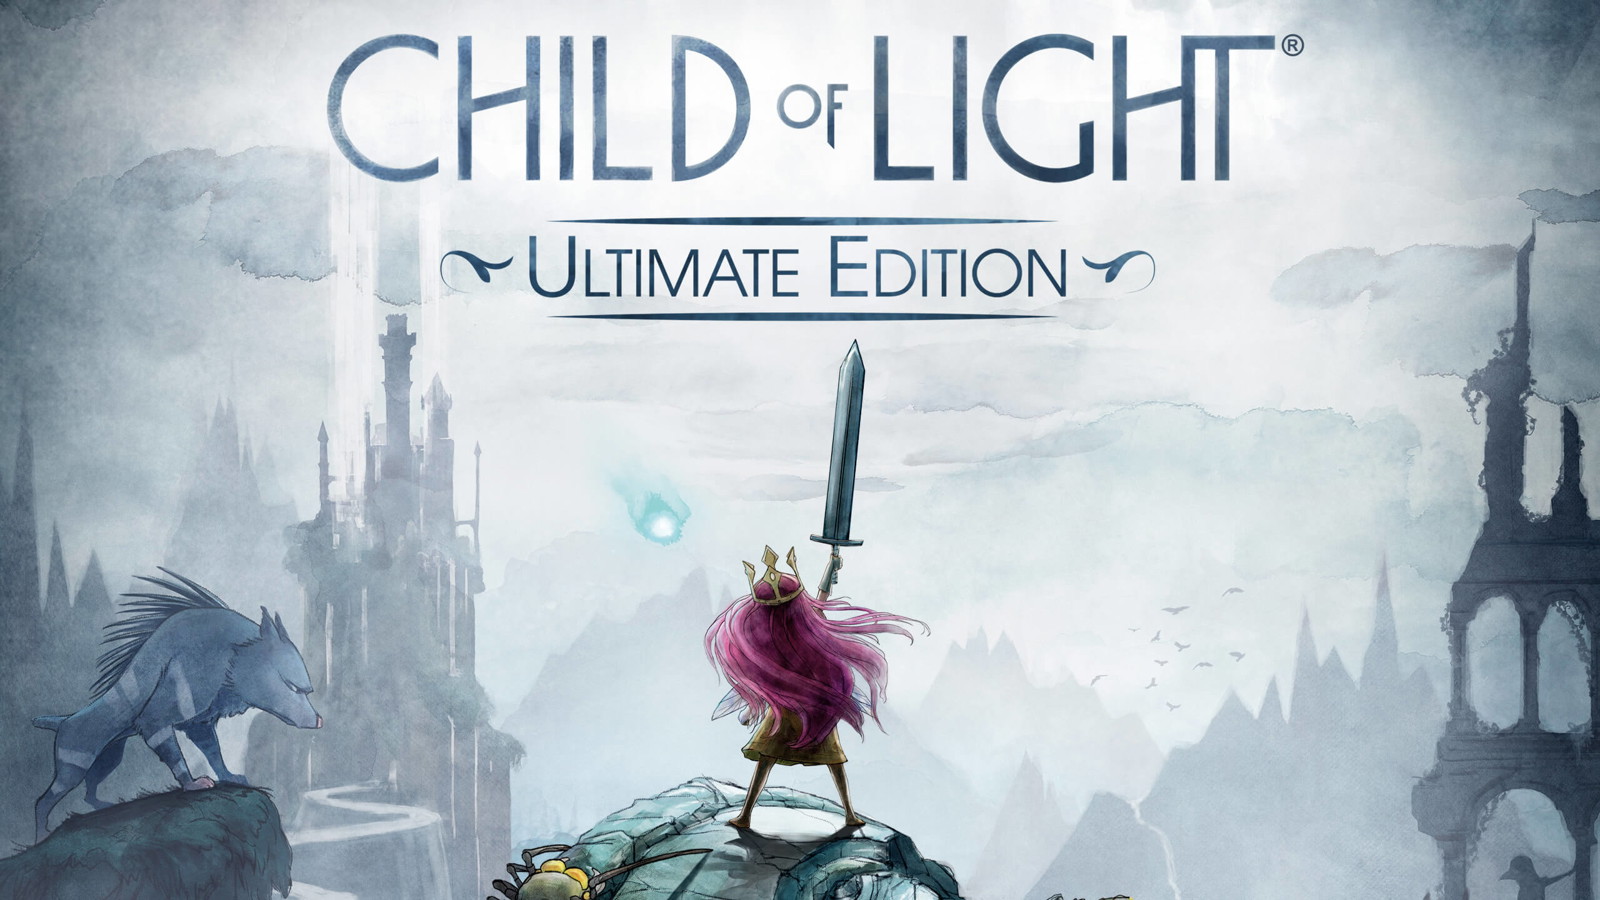 Child of Light was a success 